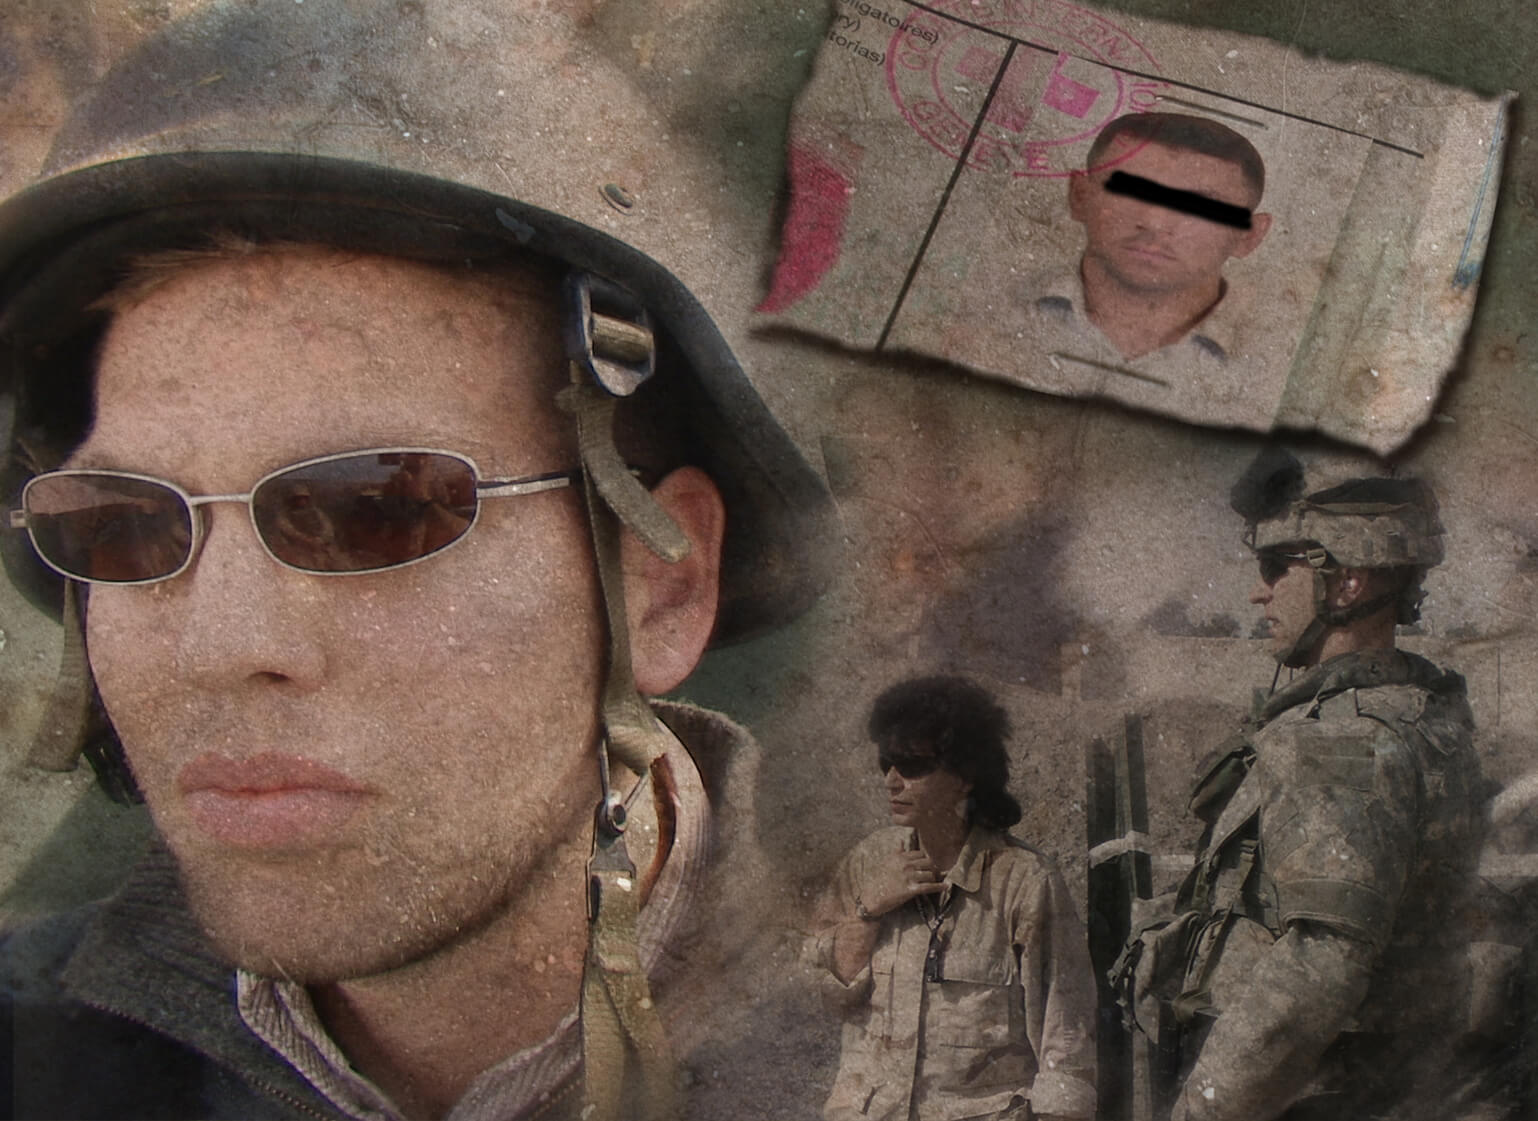 A graphic from The List. Many different images are collaged together. On the left side of the frame, is a headshot of a person wearing sunglasses and a military uniform. They wear a helmet with a camo pattern. On the right side of the images stand two more soldiers. In the top right corner, is a headshot of a person on a ripped piece of paper. There is a black censorship box over their eyes. Much of the image is blurry.